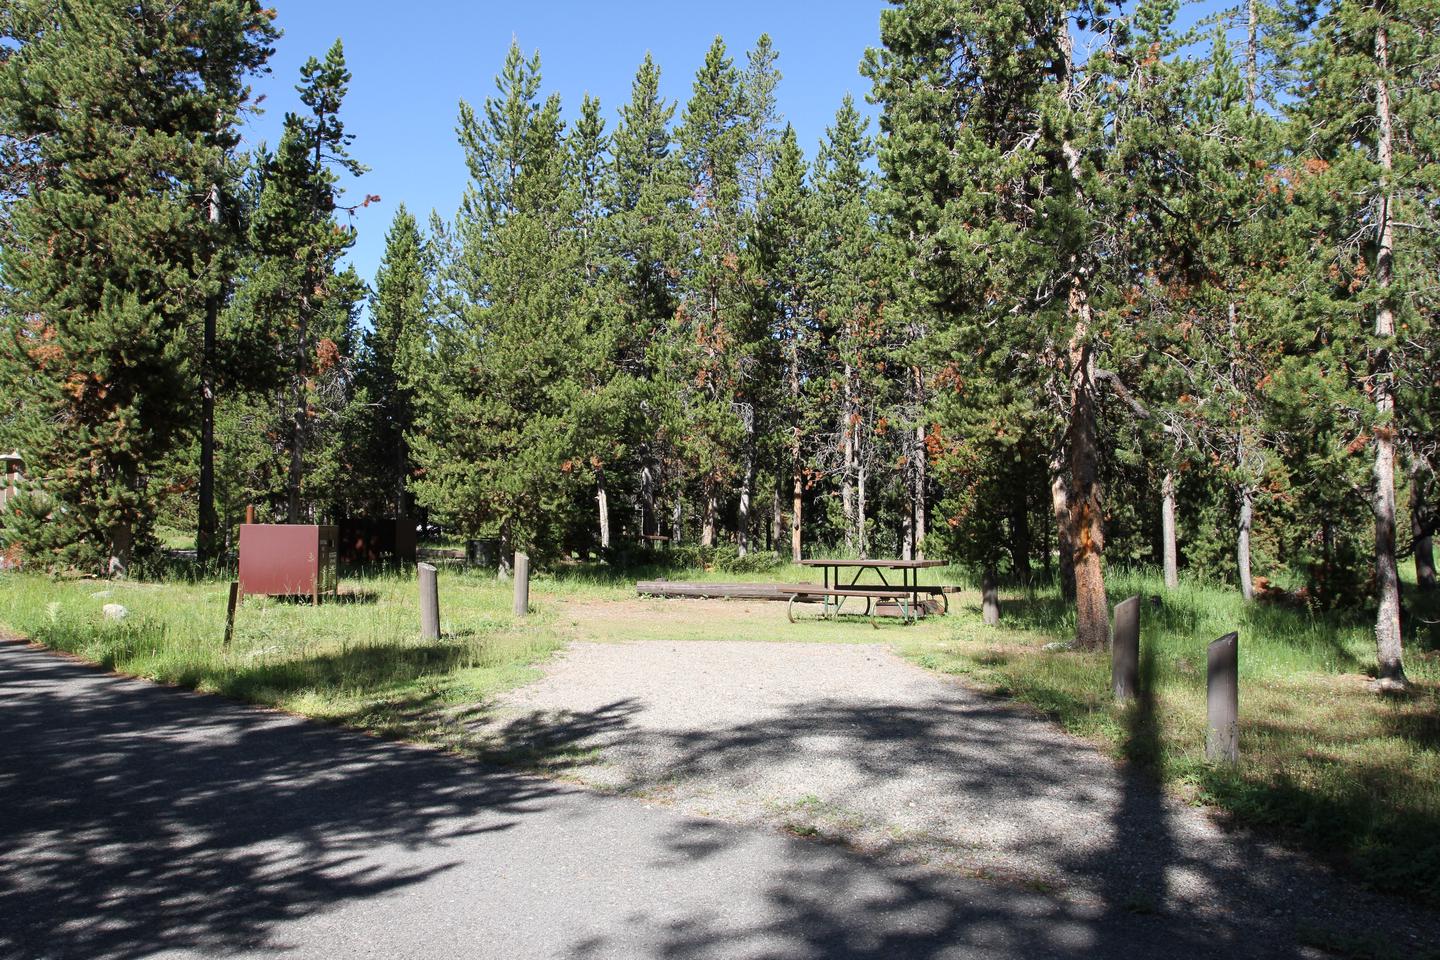 Indian Creek Campground site #29